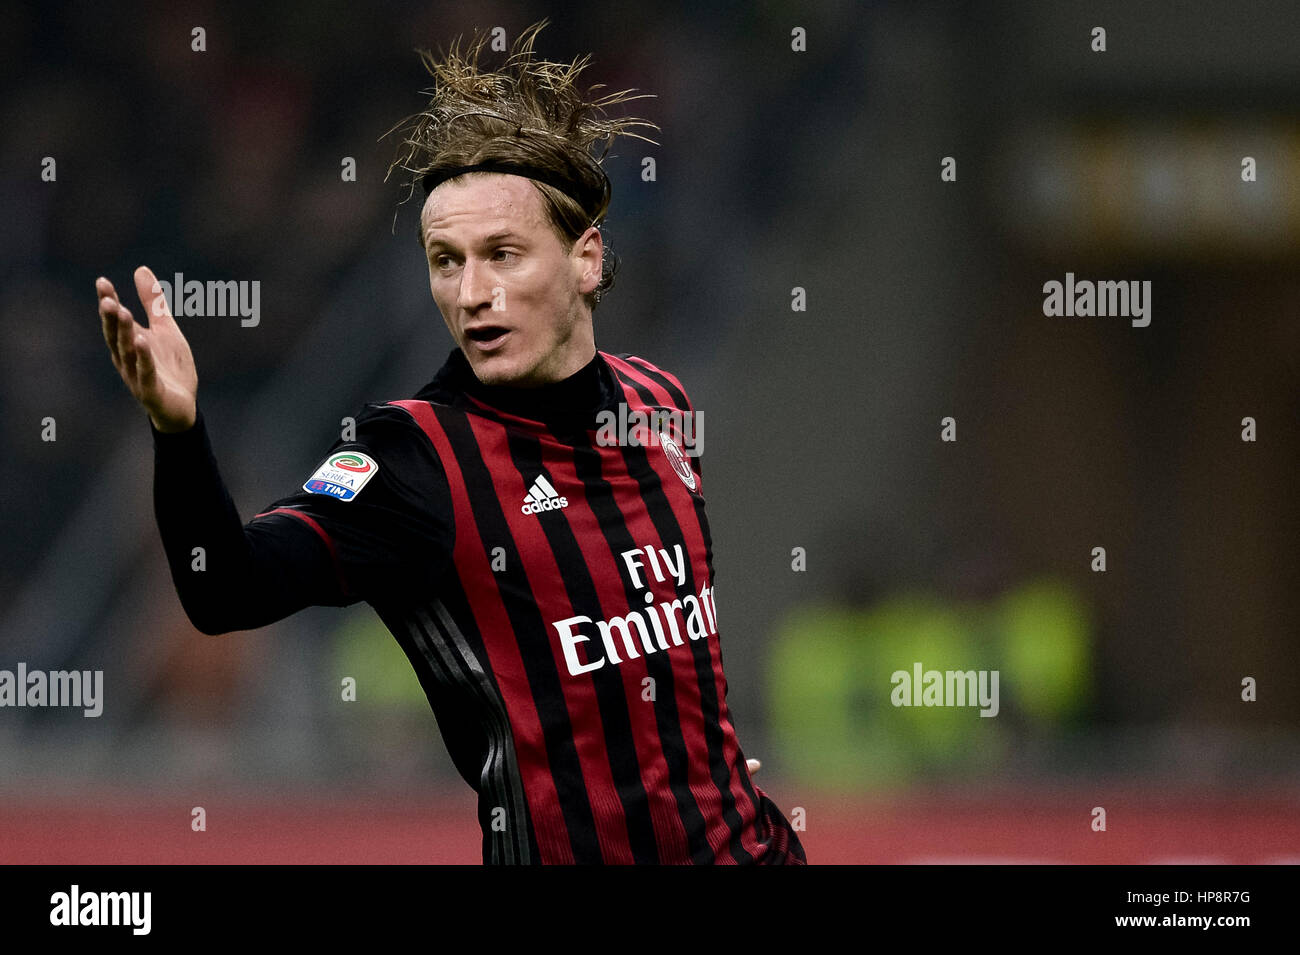 Milan, Italy. 2017, 20 February: Ignazio Abate of AC Milan gestures during the Serie A football match between AC Milan and ACF Fiorentina. Credit: Nicolò Campo/Alamy Live News Stock Photo